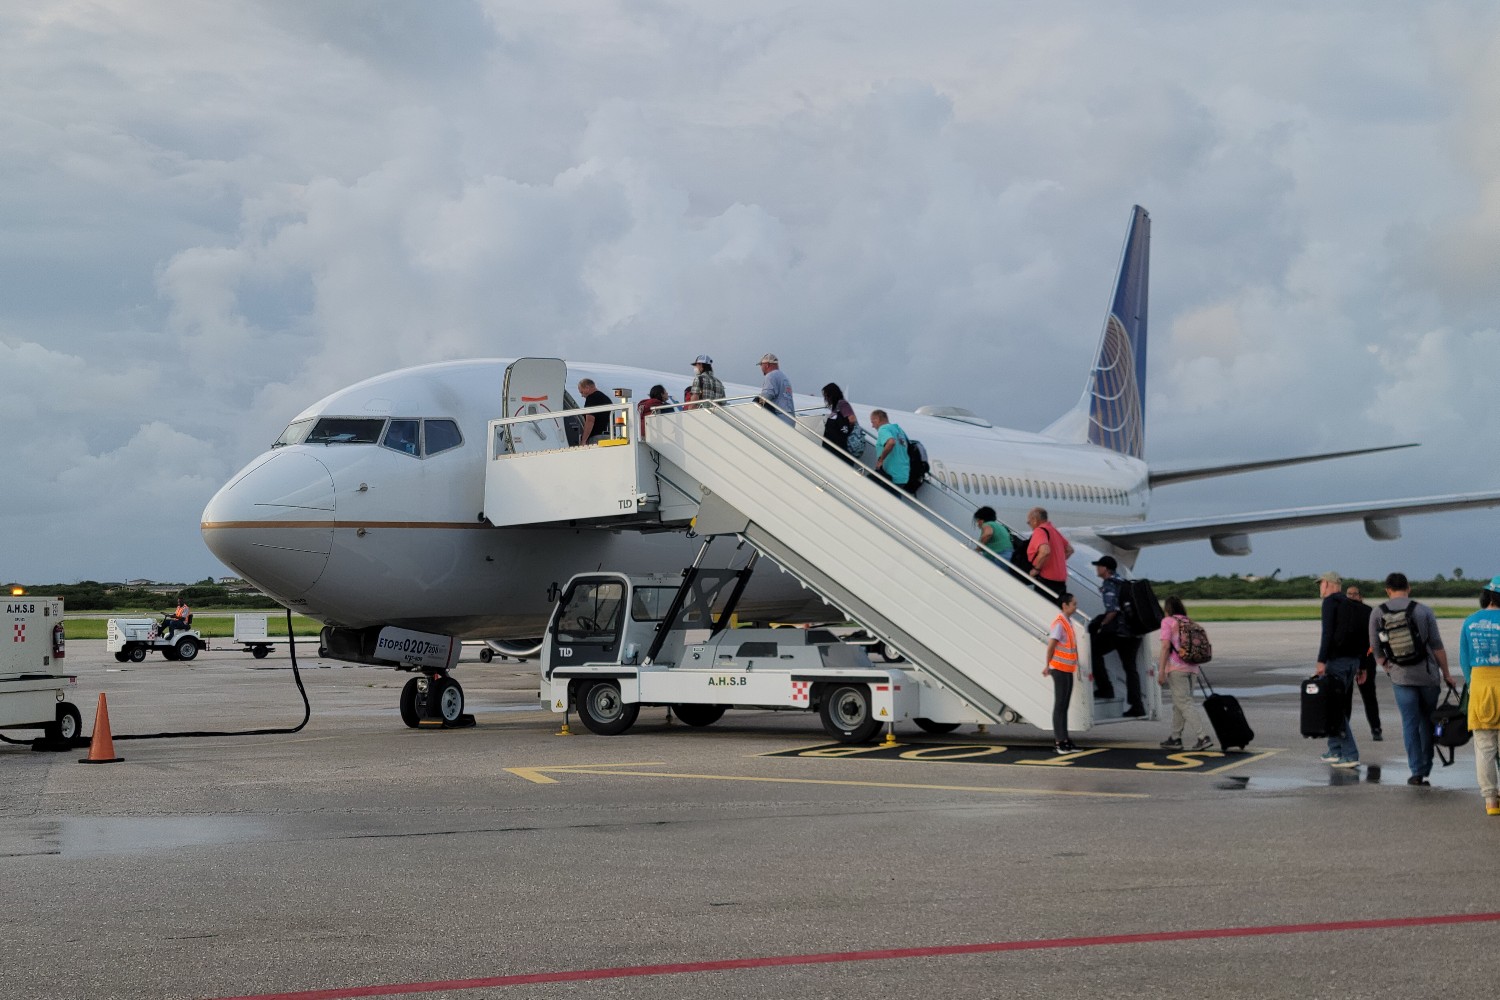 A United Airlines airplane boards at Flamingo - Bonaire International Airport.